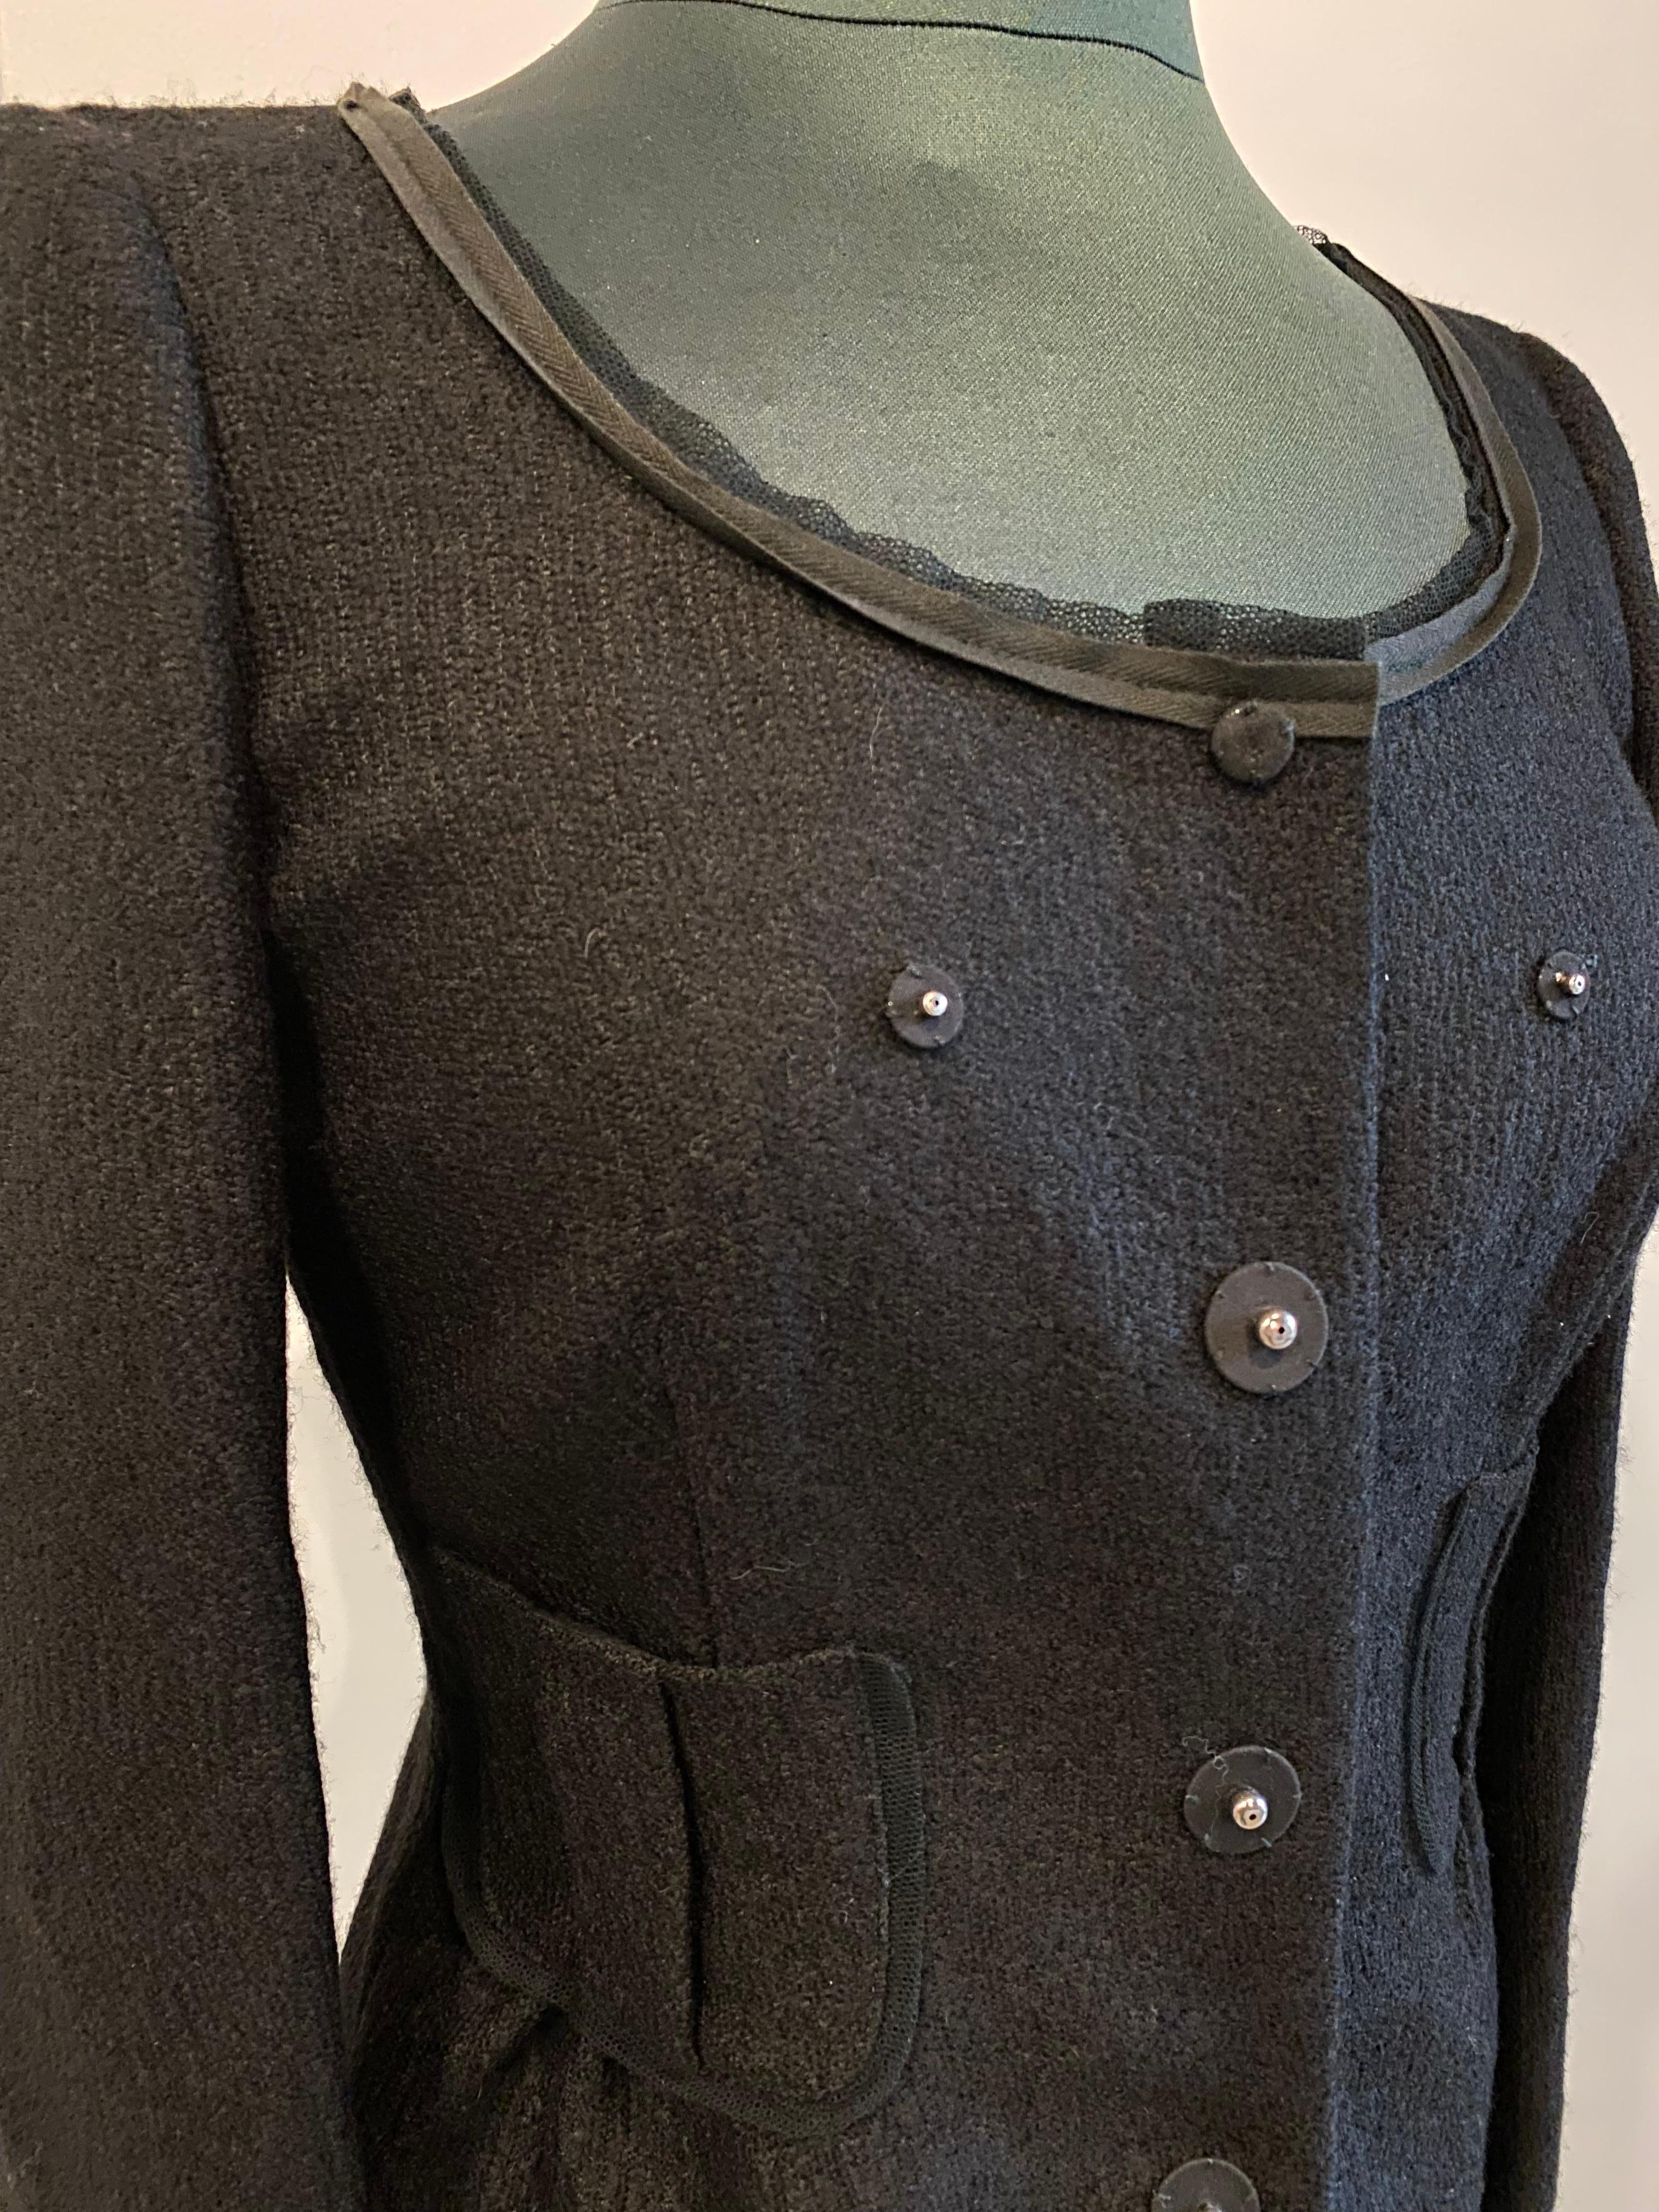 Prada fitted jacket
in viscose wool and nylon.
With exposed silver buttons and pockets.
Italian size 42.
Shoulders 39
Breast 41
Waist 43
Sleeve length 60
In excellent general condition.